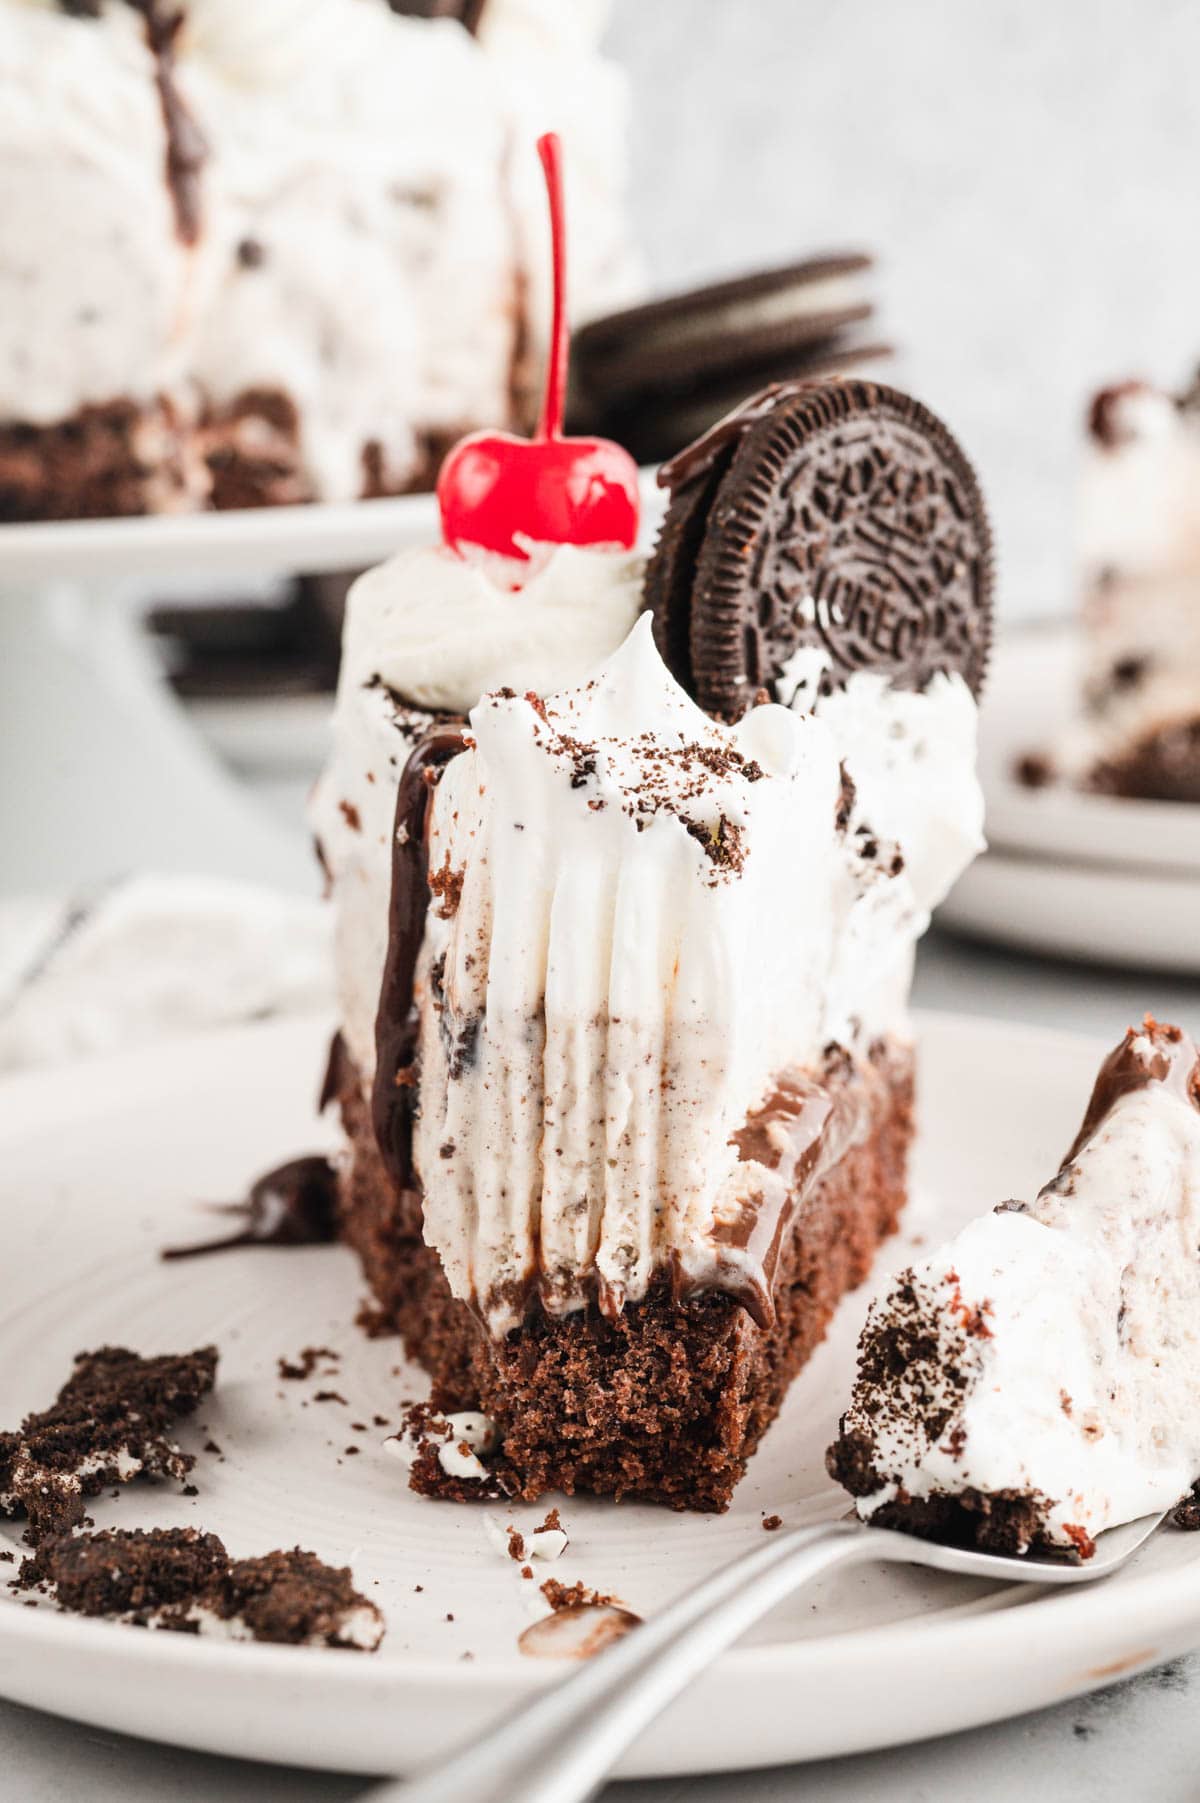 Slice of oreo ice cream cake with a fork.